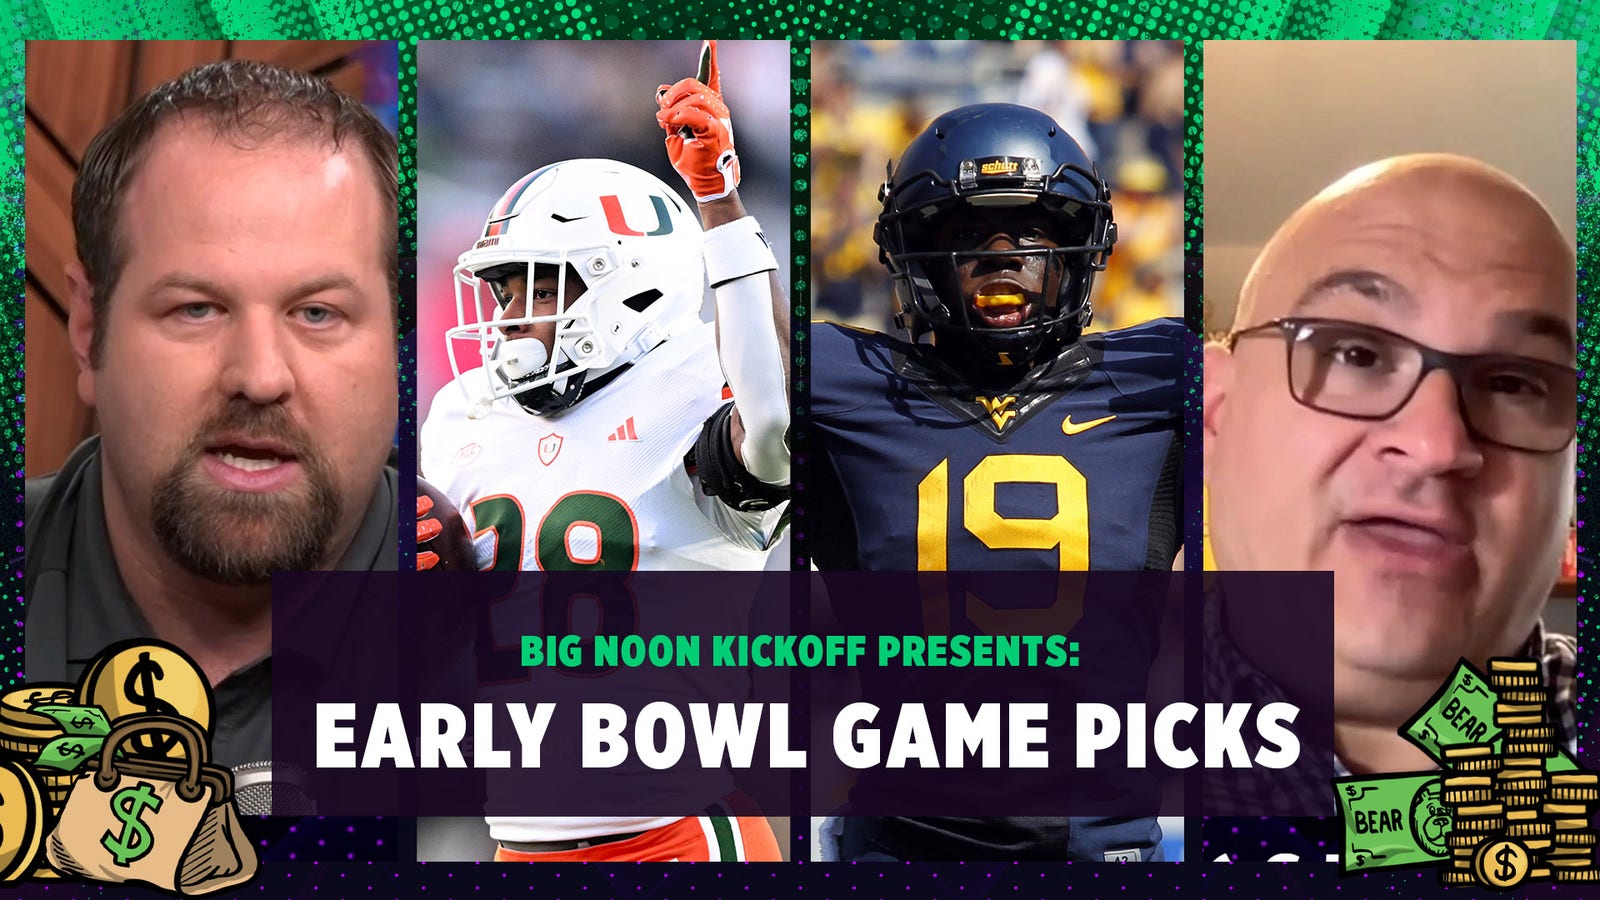 Miami vs. Rutgers, UNC vs. West Virginia early bowl game previews